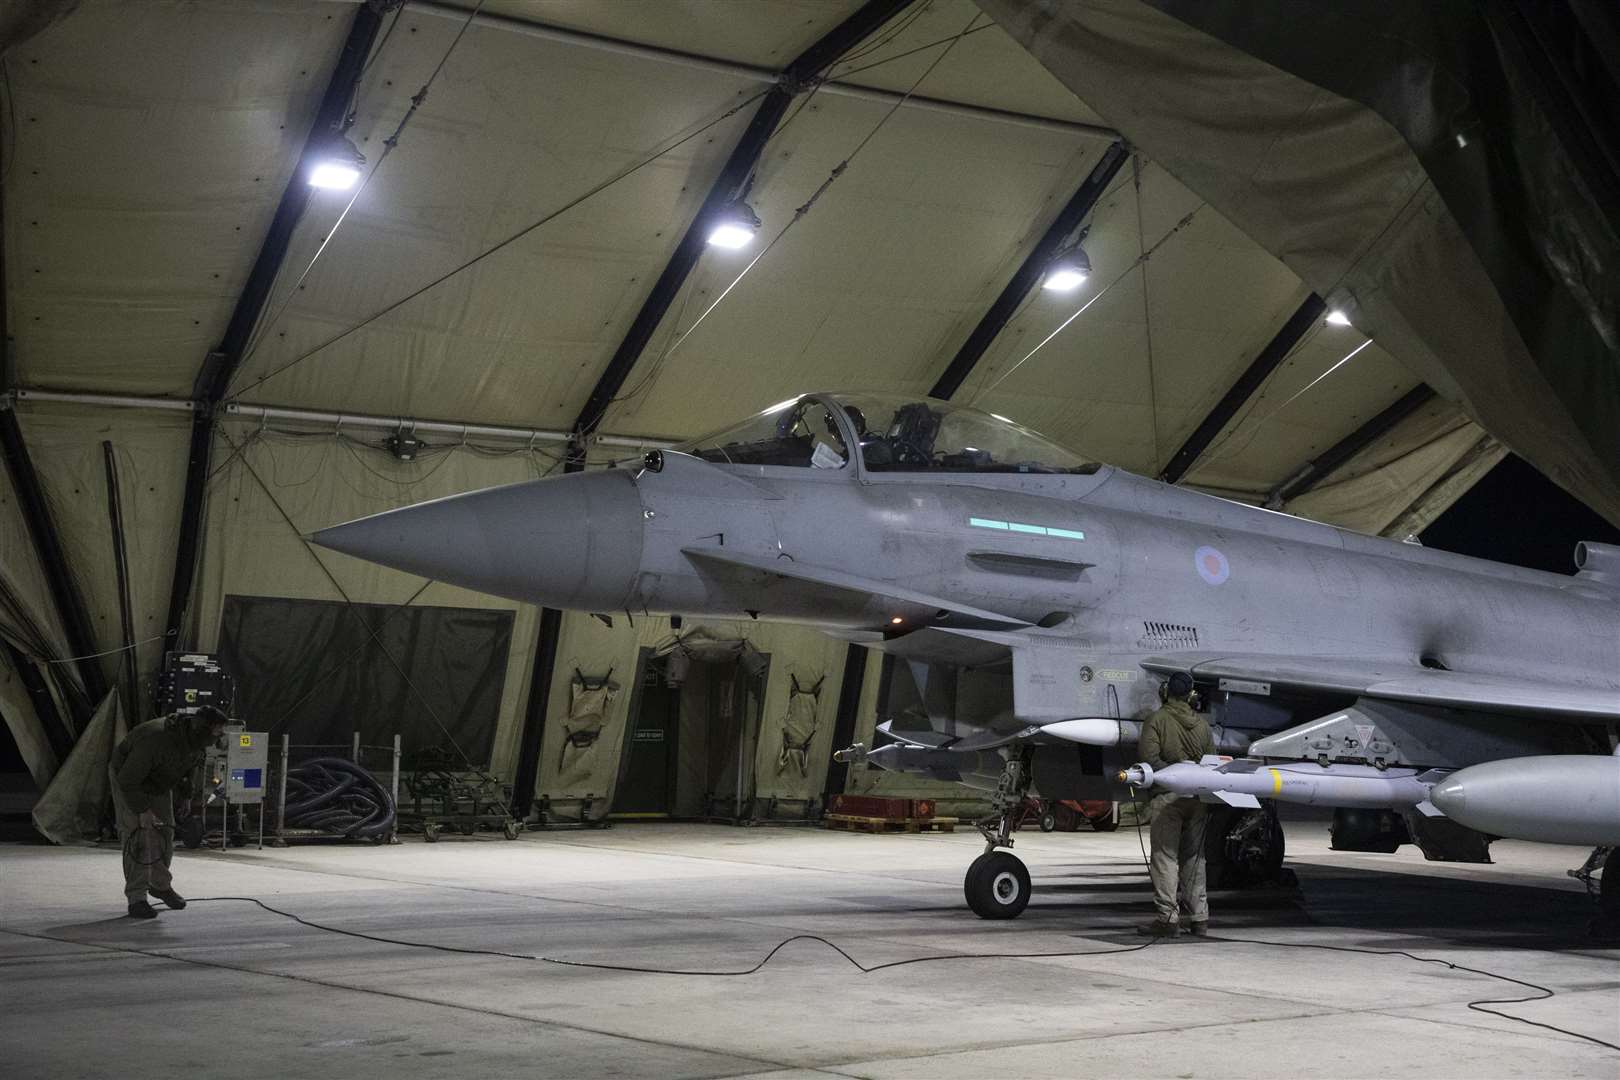 An RAF Typhoon FRG4 being prepared to conduct further strikes against Houthi targets on Saturday (Cpl Samantha Drummee/MOD/Crown Copyright/PA)